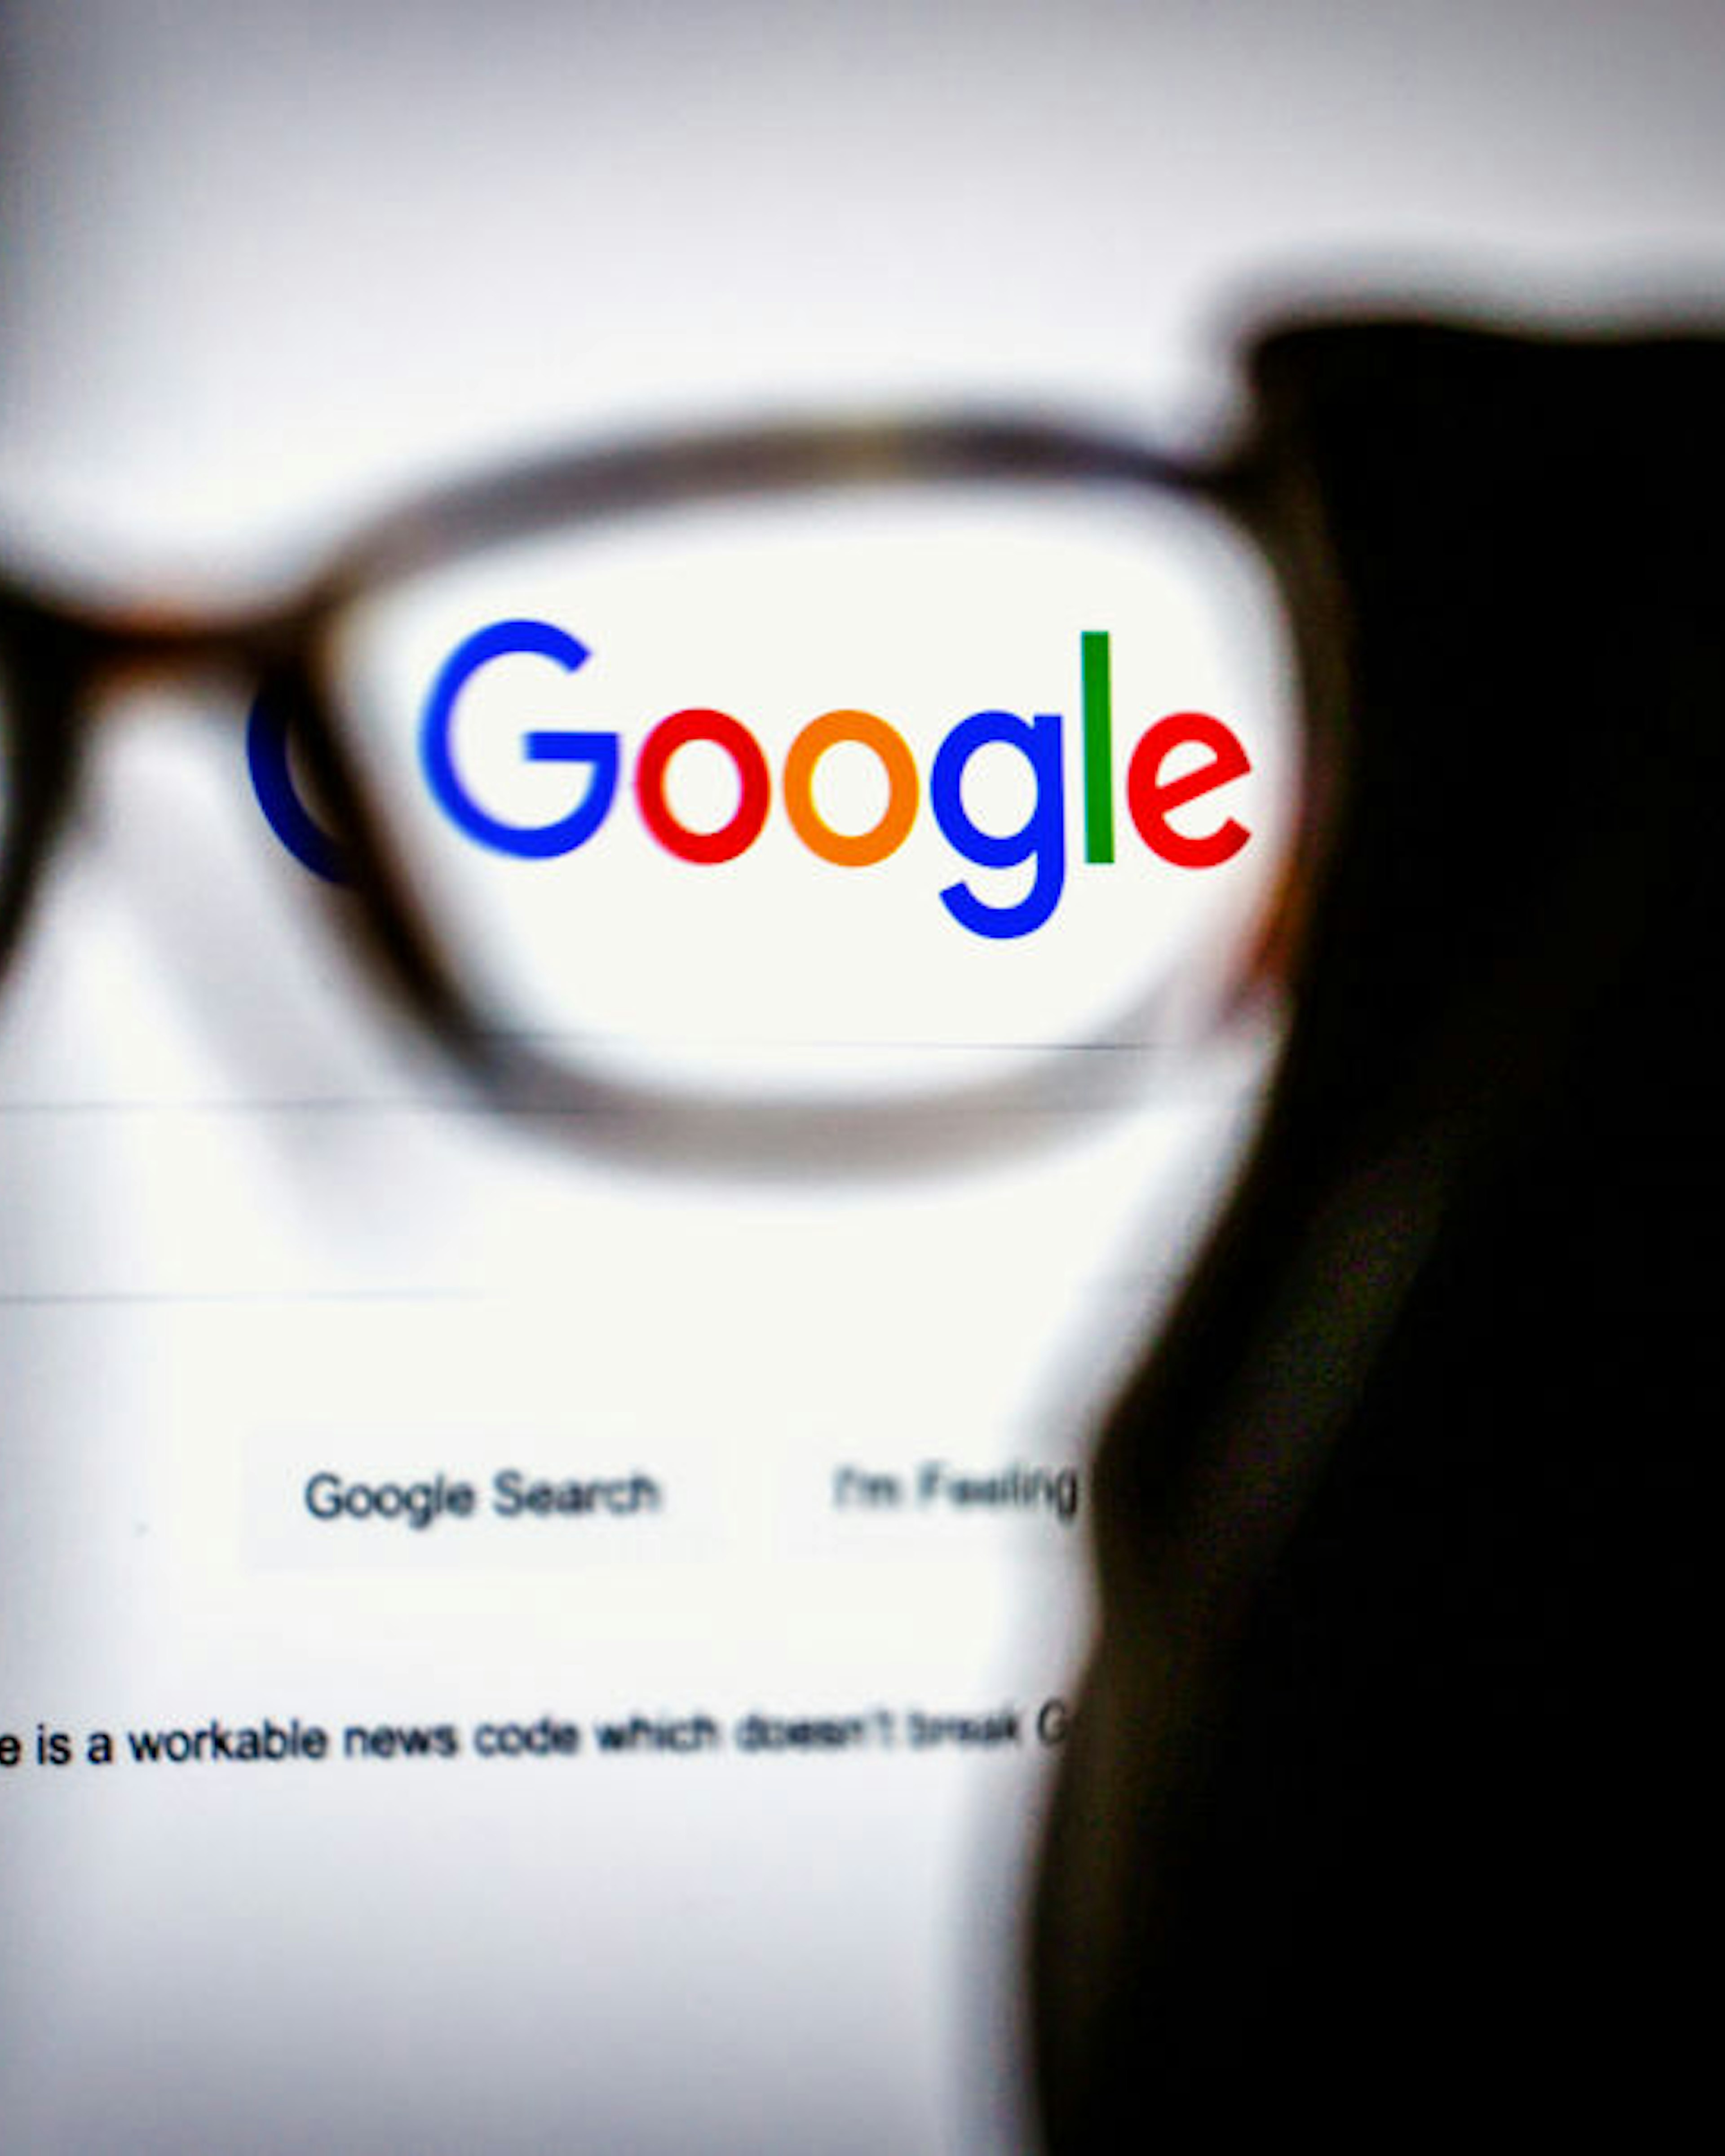 A link to Google's proposal to a workable news code on the company's homepage, arranged on a desktop computer in Sydney, Australia, on Friday, Jan. 22, 2021. Google threatened to disable its search engine in Australia if its forced to pay local publishers for news, a dramatic escalation of a months-long standoff with the government. Photographer: David Gray/Bloomberg via Getty Images